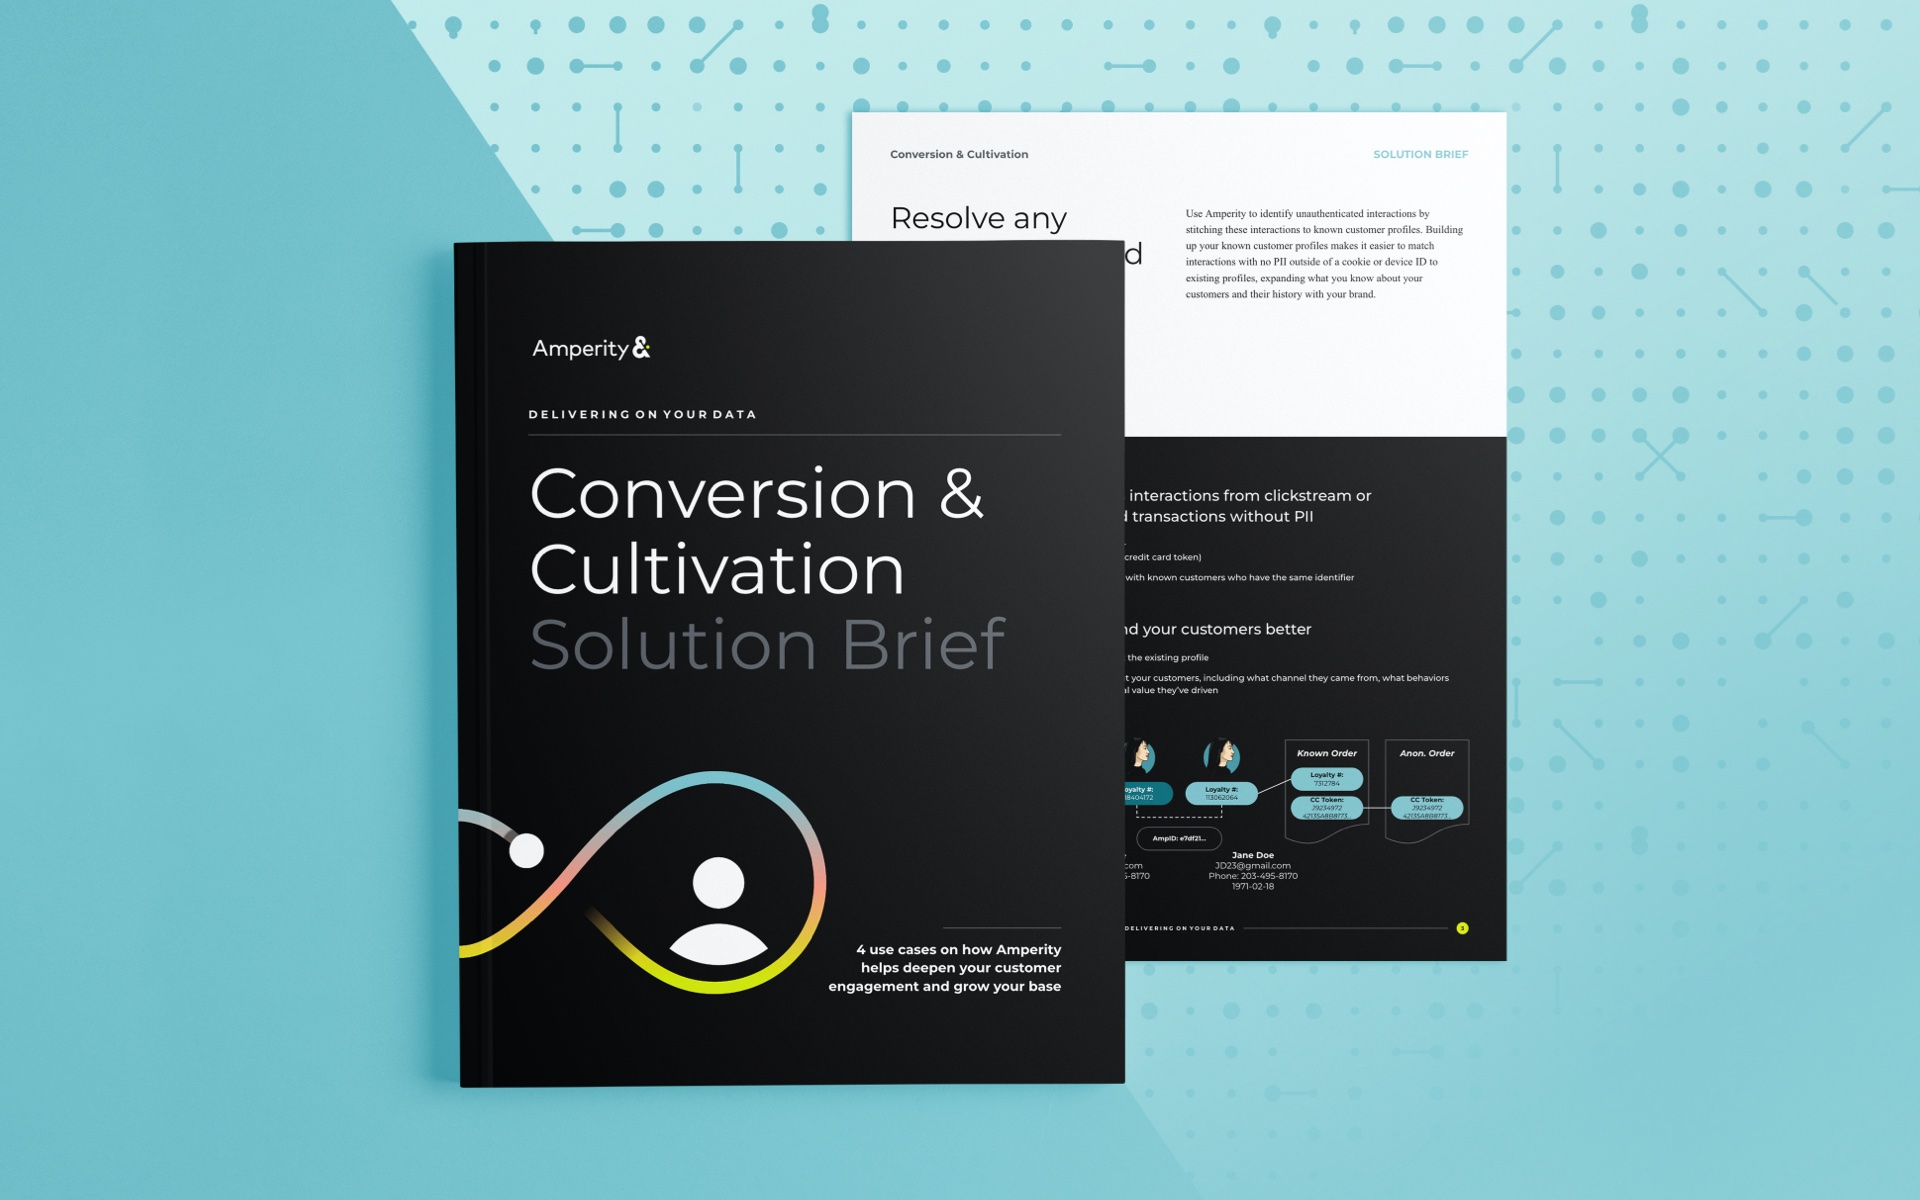 Screenshot of the front page of the conversion & cultivation solution brief